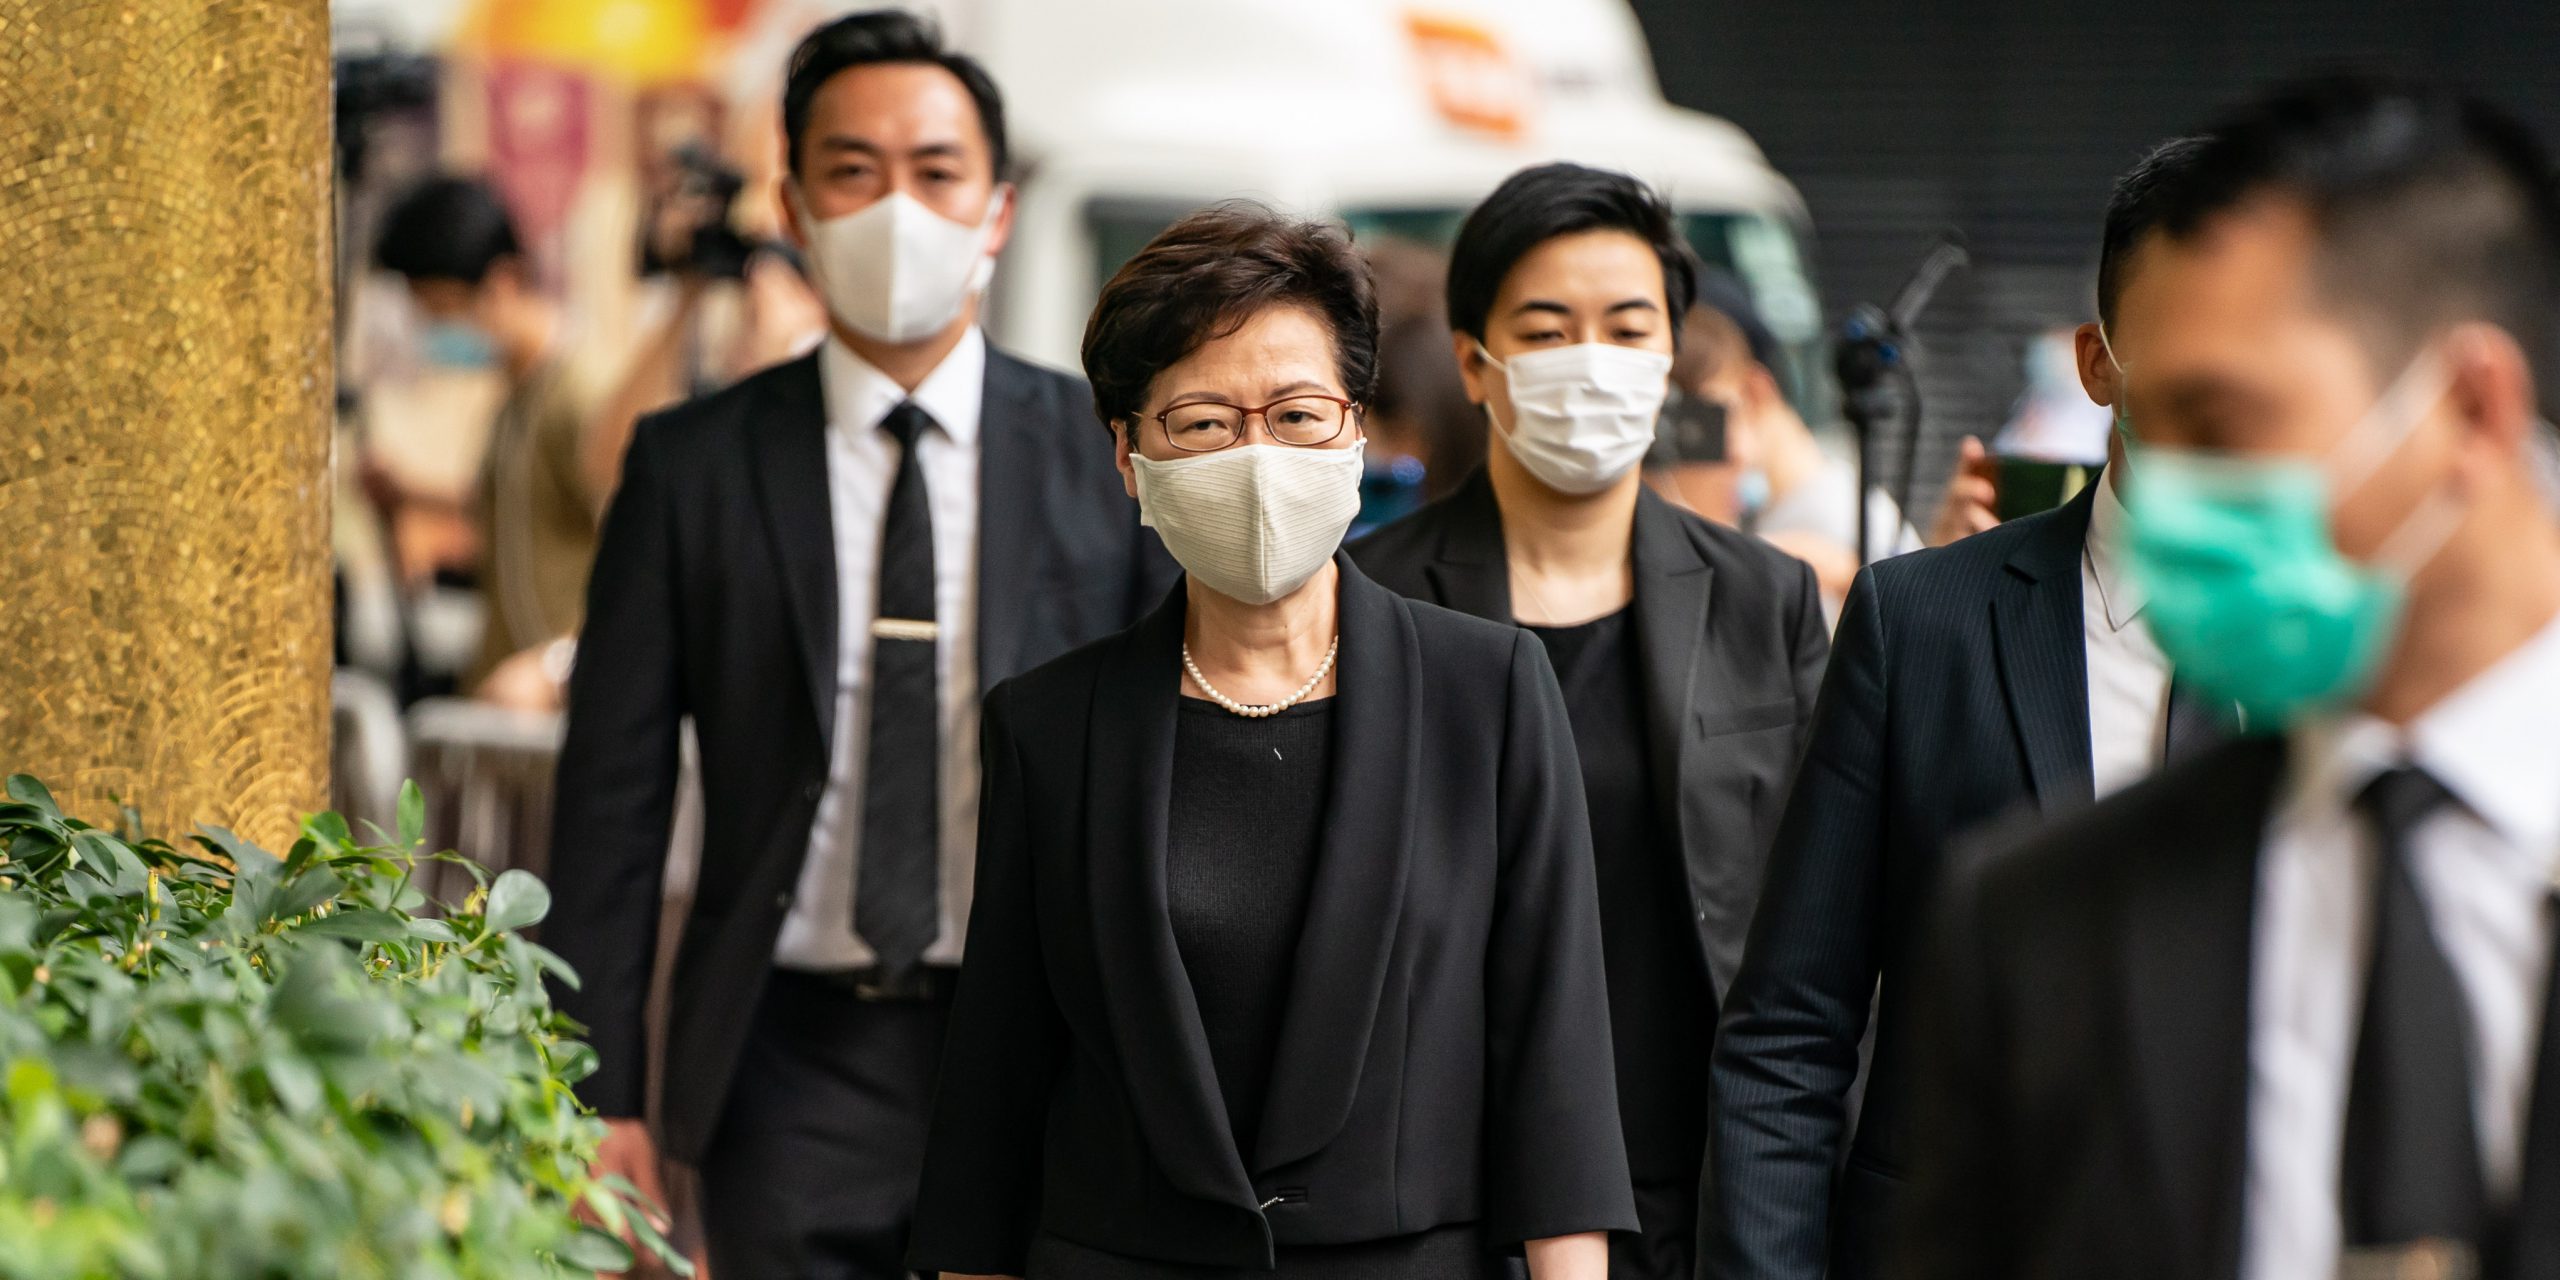 
La governatrice di Hong Kong Carrie Lam il 10 luglio 2020 (Anthony Kwan/Getty Images)